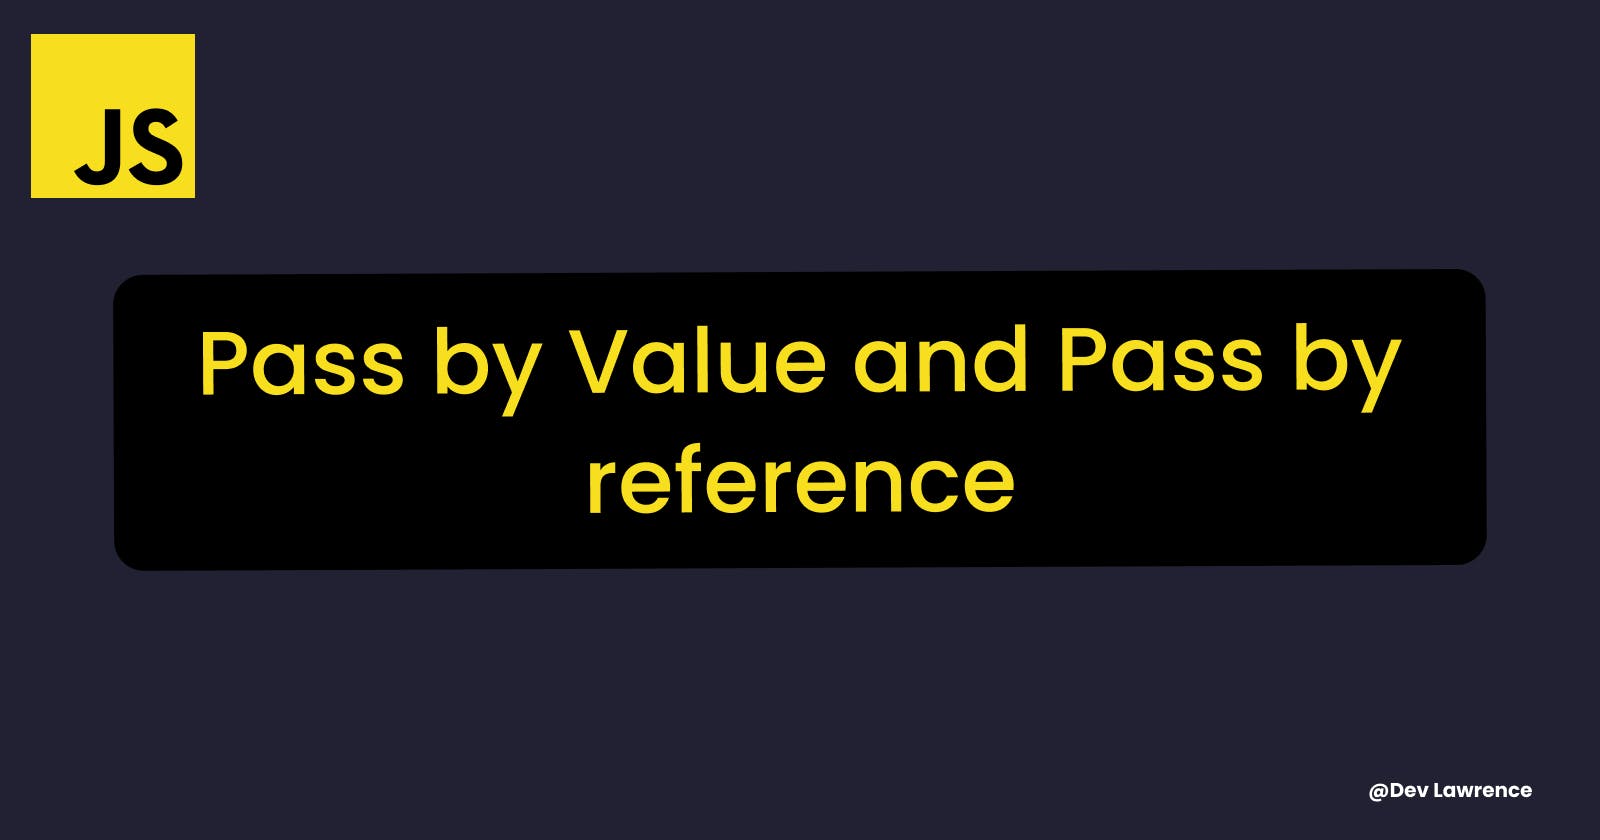 All you need to know about Pass by Value and Pass by Reference